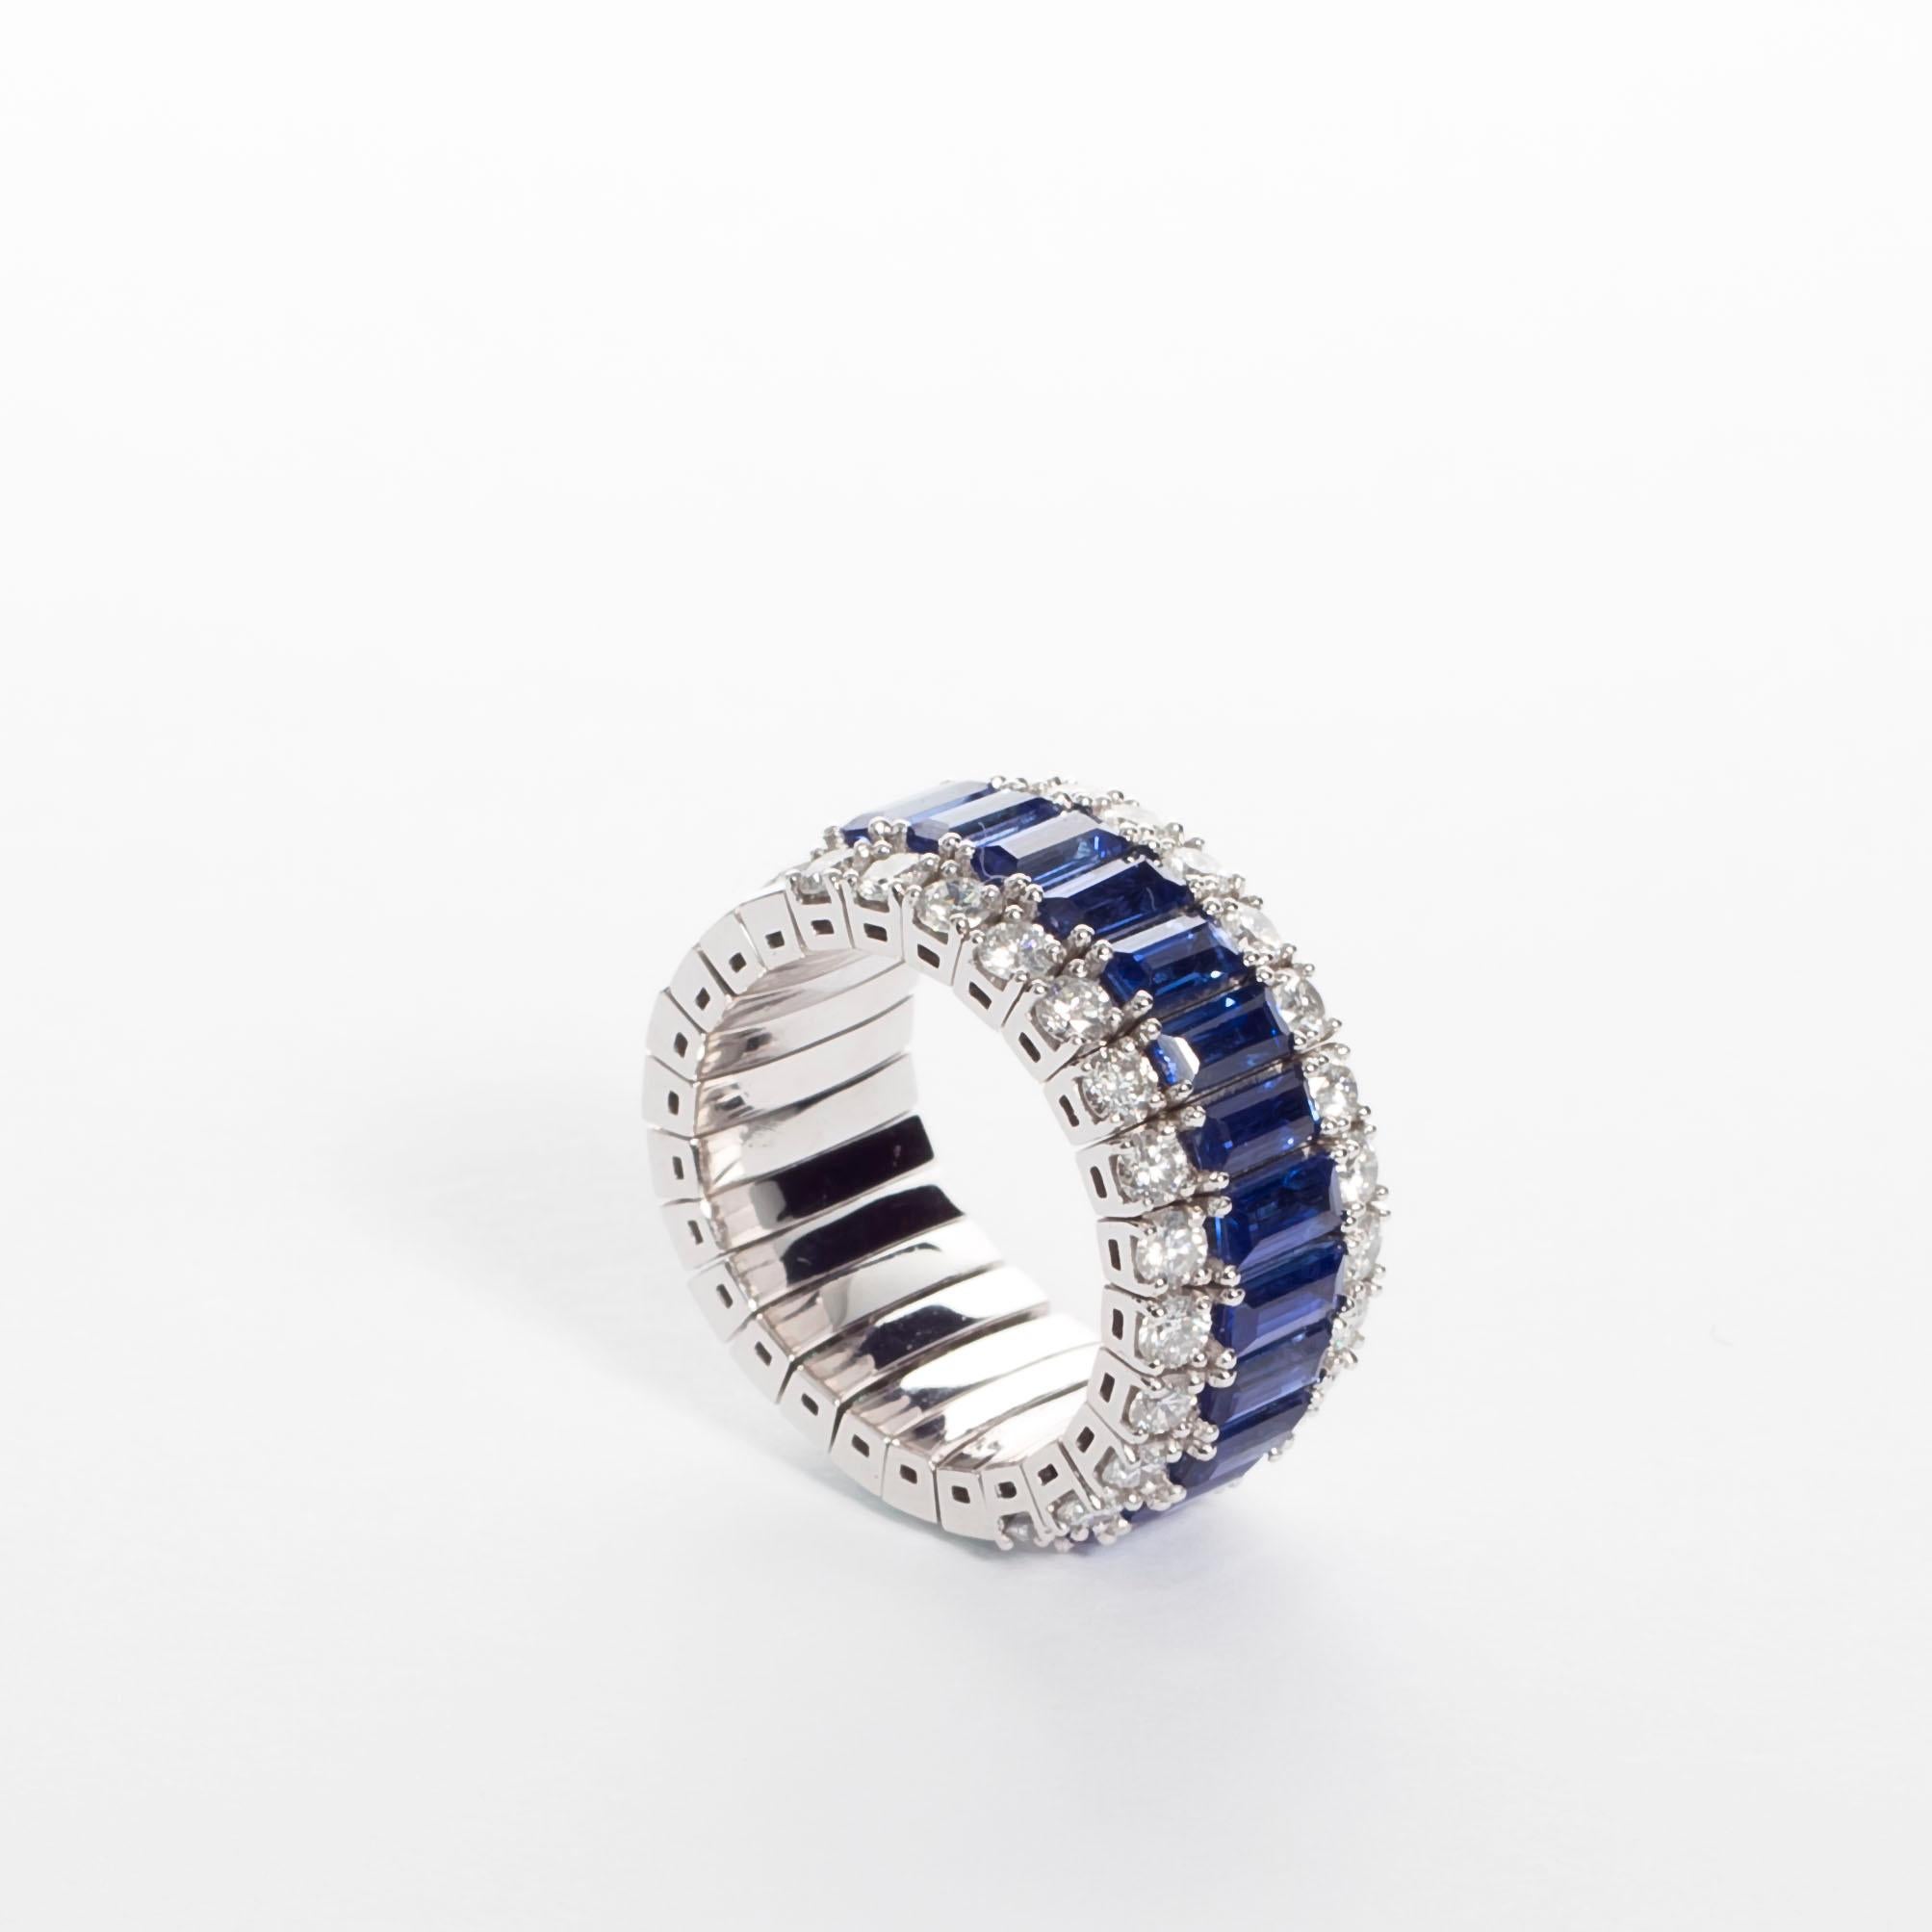 Indulge in our platinum flexible ring, a breathtaking symphony of emerald, sapphire, and diamonds. This exquisite piece boasts 13 blue sapphire baguettes totaling 3.83 carats, 13 diamond baguettes totaling 2.23 carats, 26 brilliant-cut diamonds